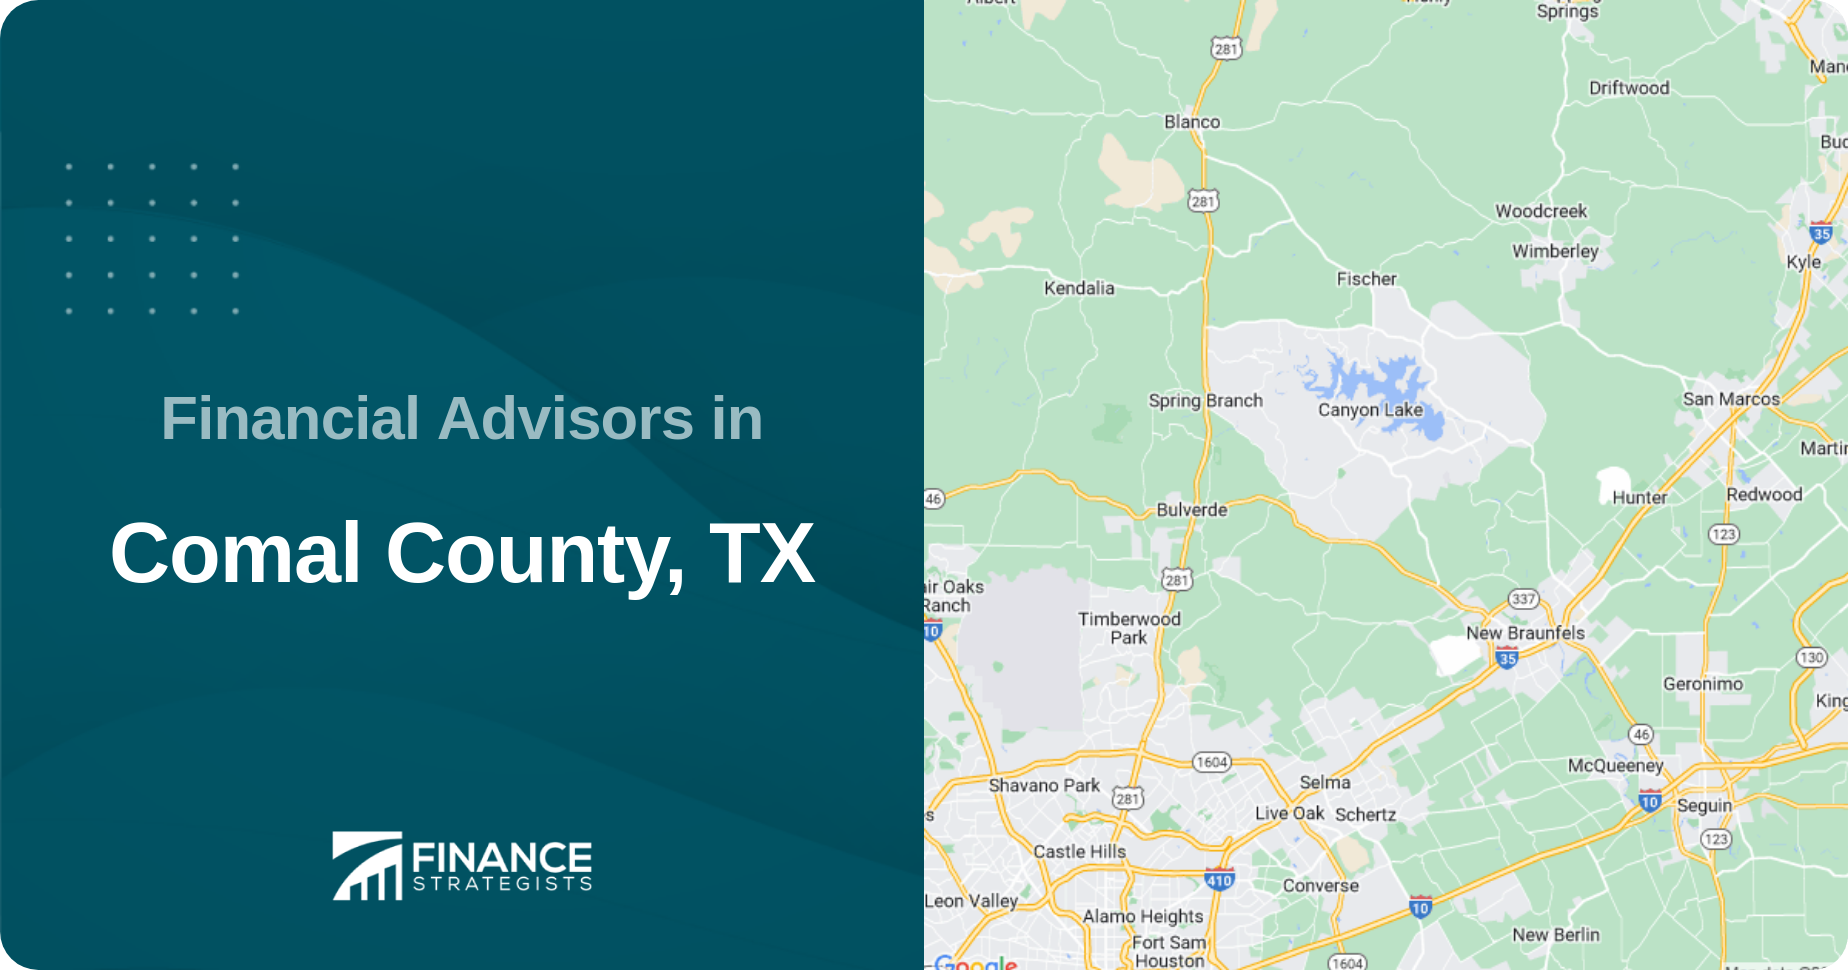 Financial Advisors in Comal County, TX